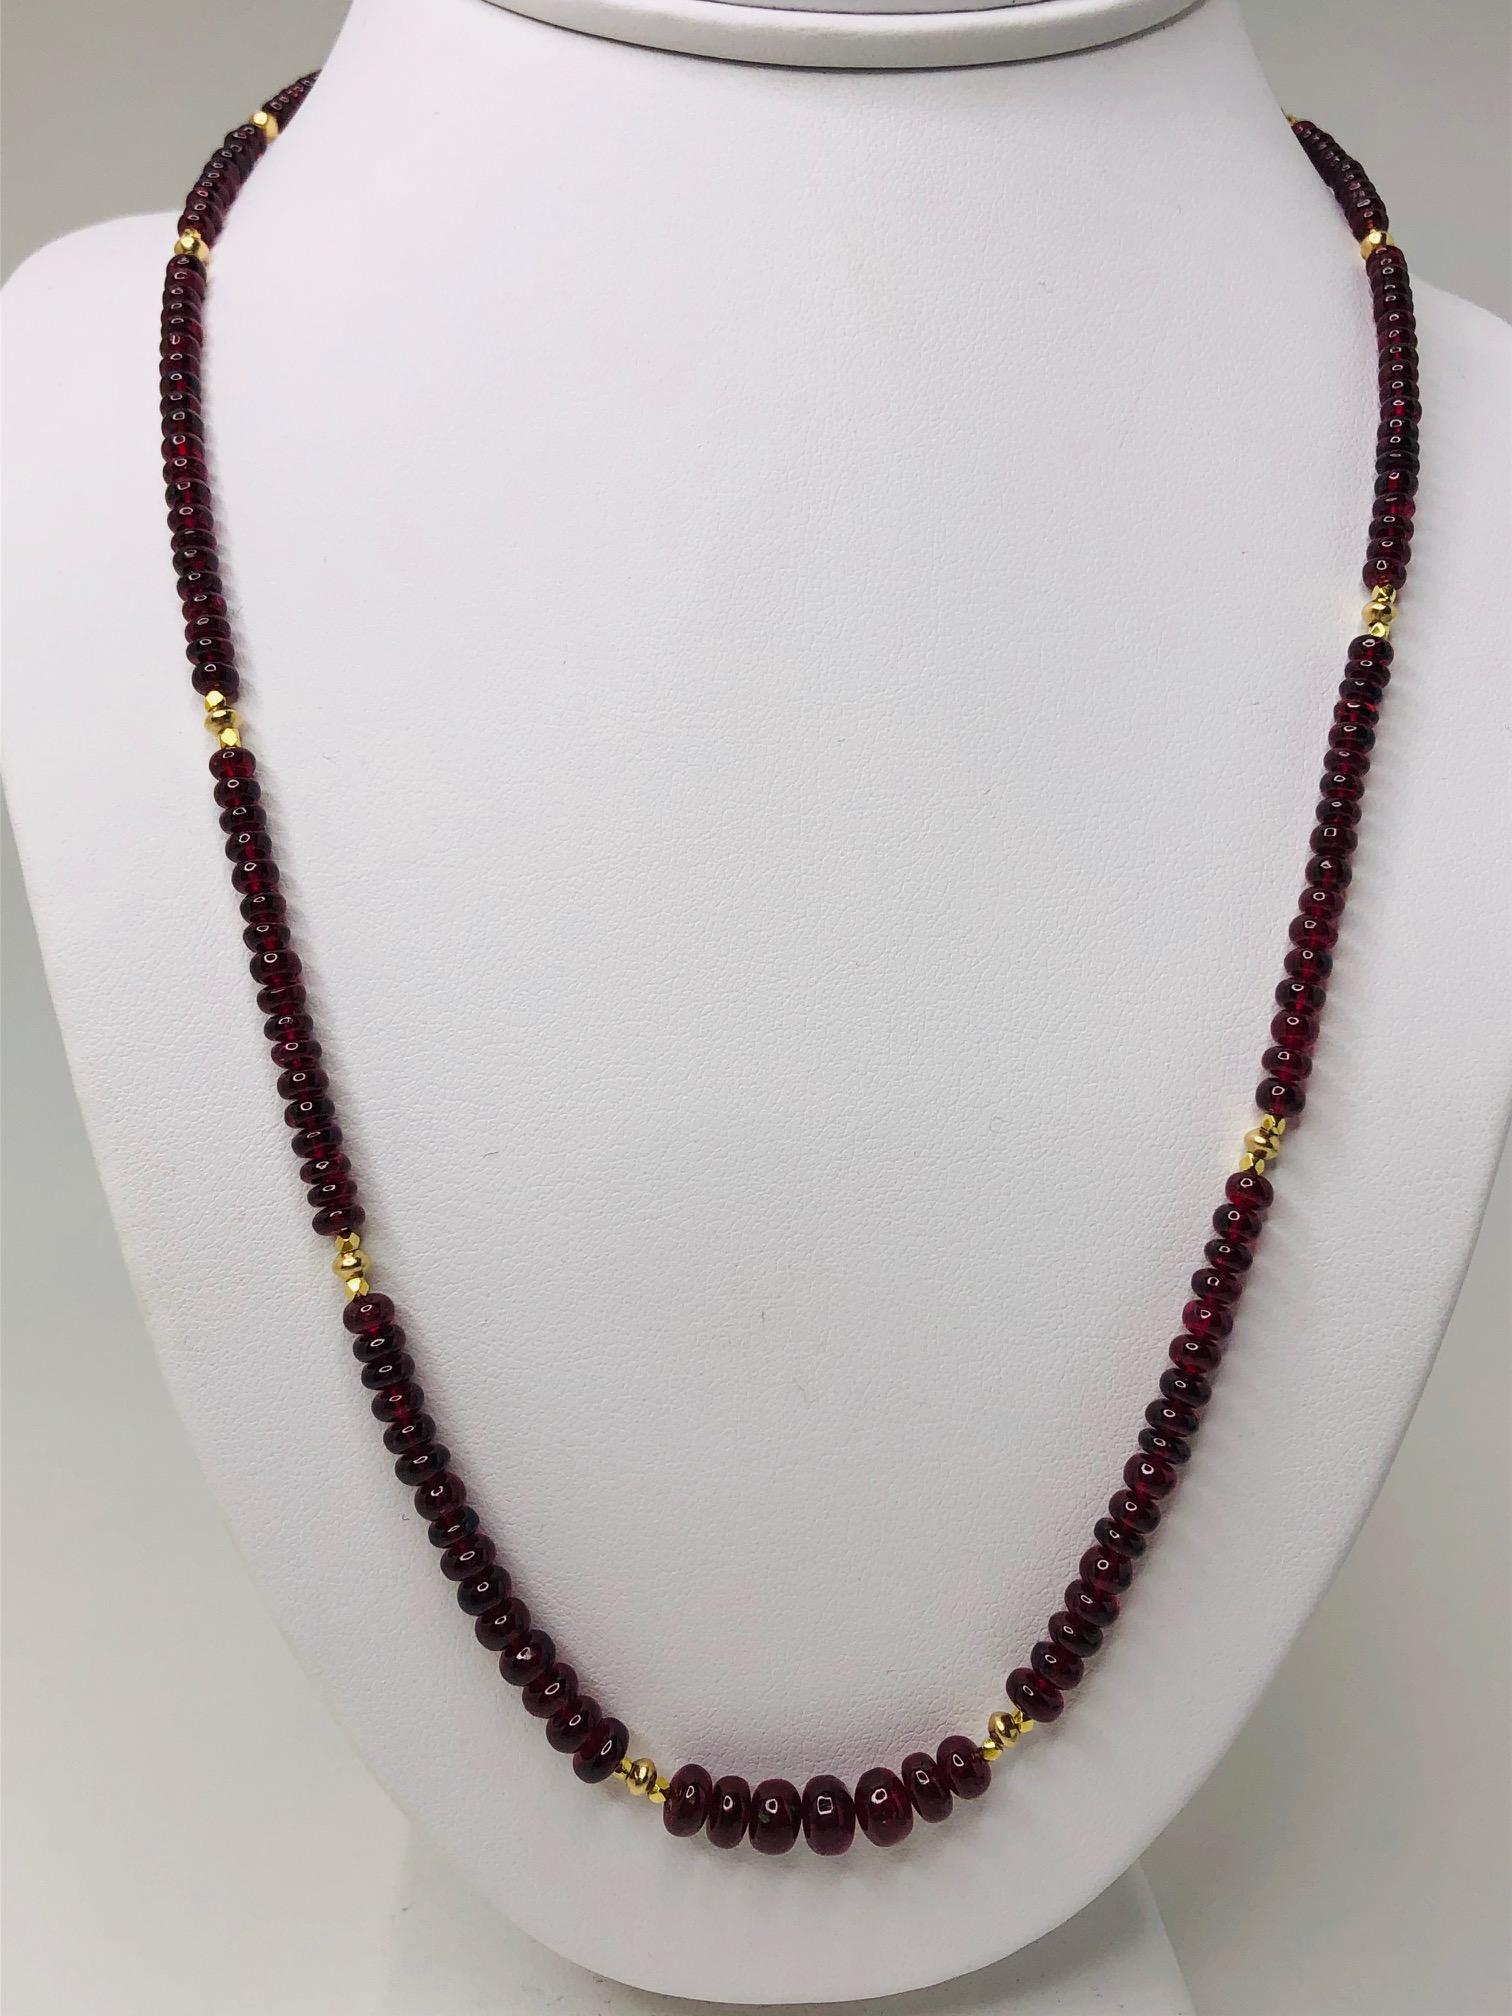 Artisan Red Spinel Bead Graduated Strand Necklace with Yellow Gold Spacers, 21 Inches